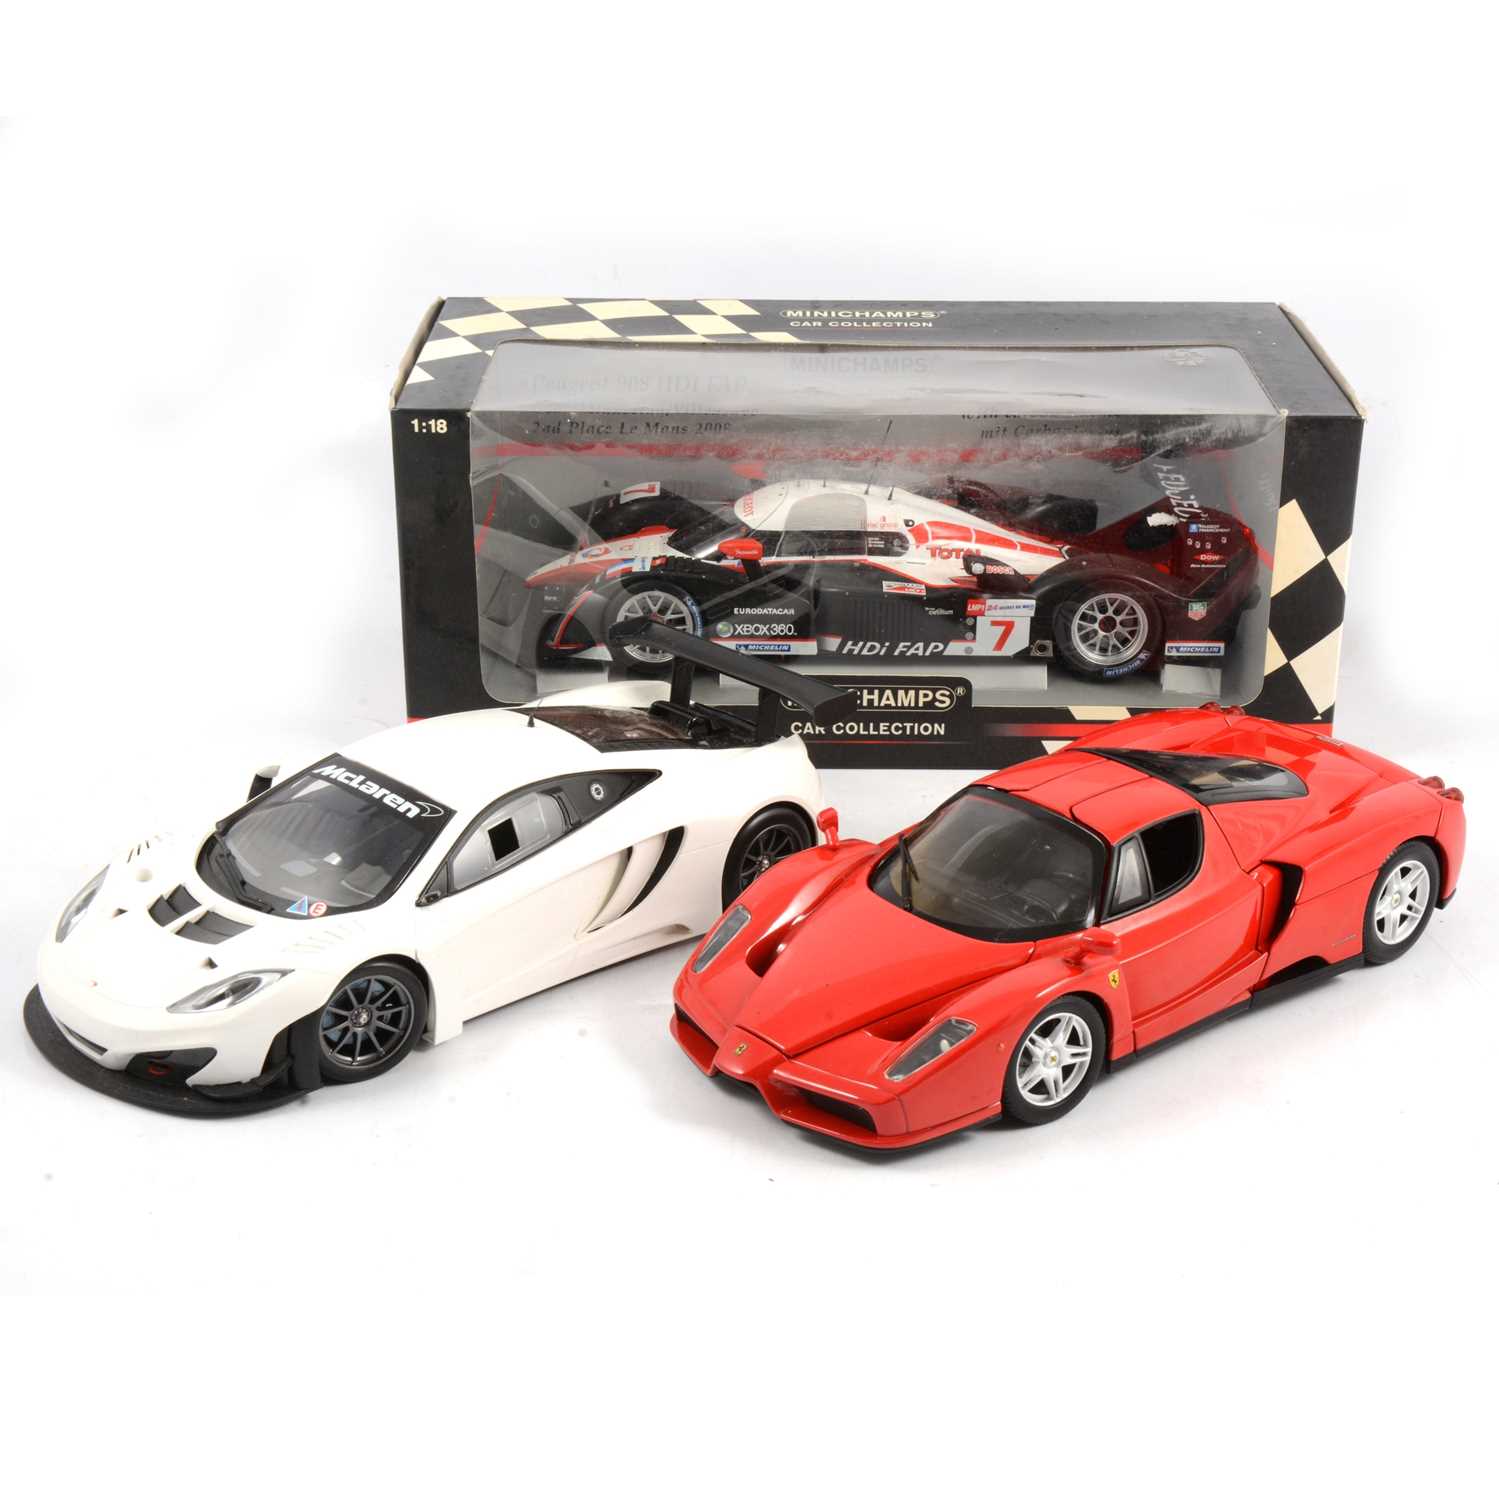 Lot 190 - Three 1:18 scale model racing cars including Minichamps Peugeot 908 HDI FAP, boxed